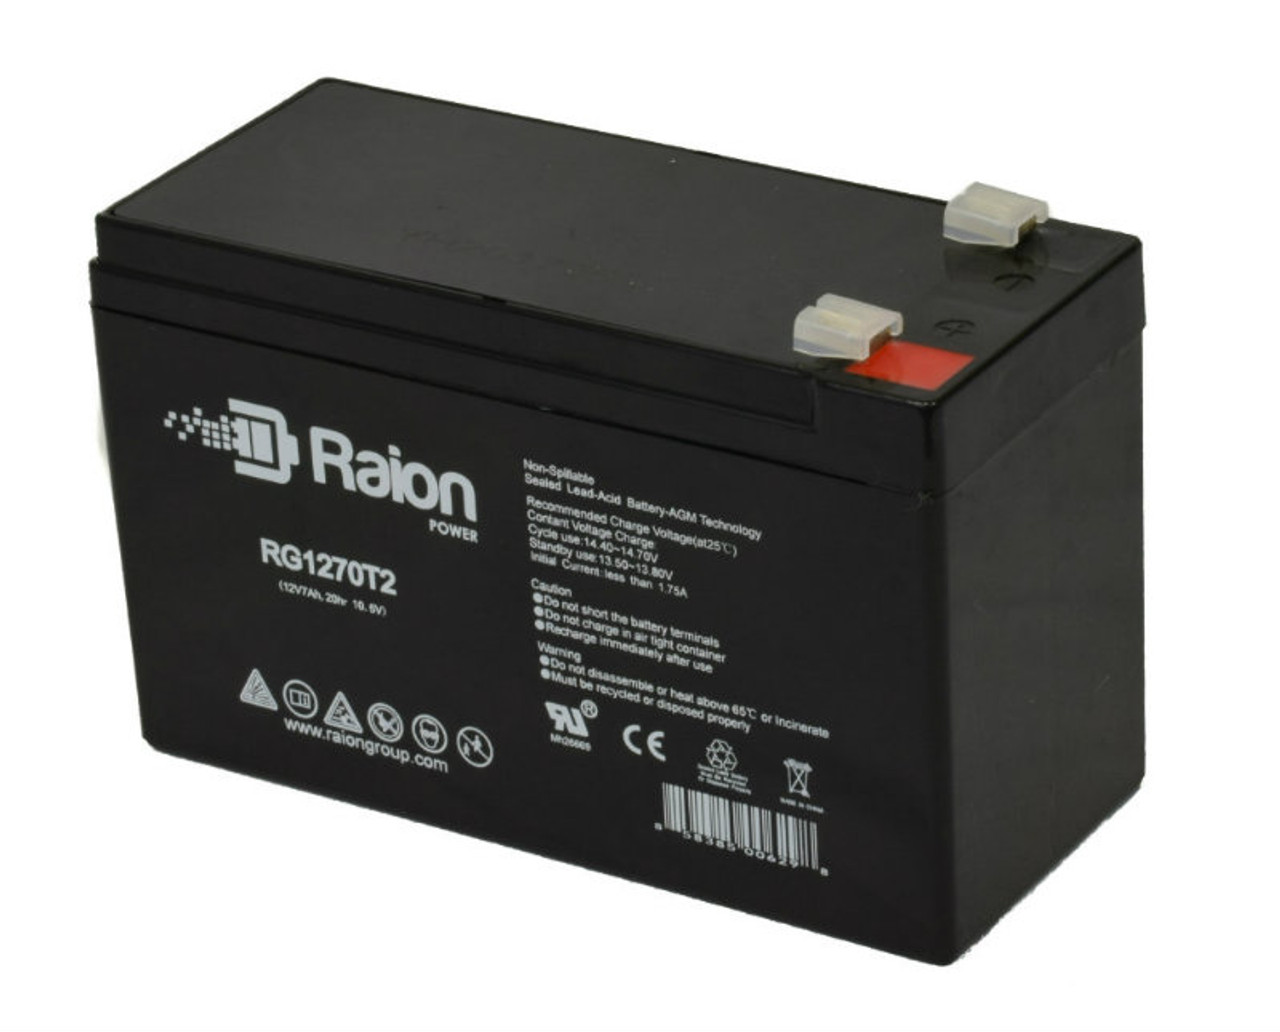 Raion Power Replacement 12V 7Ah RG1270T1 Fire Alarm Battery for ACME Security System 623